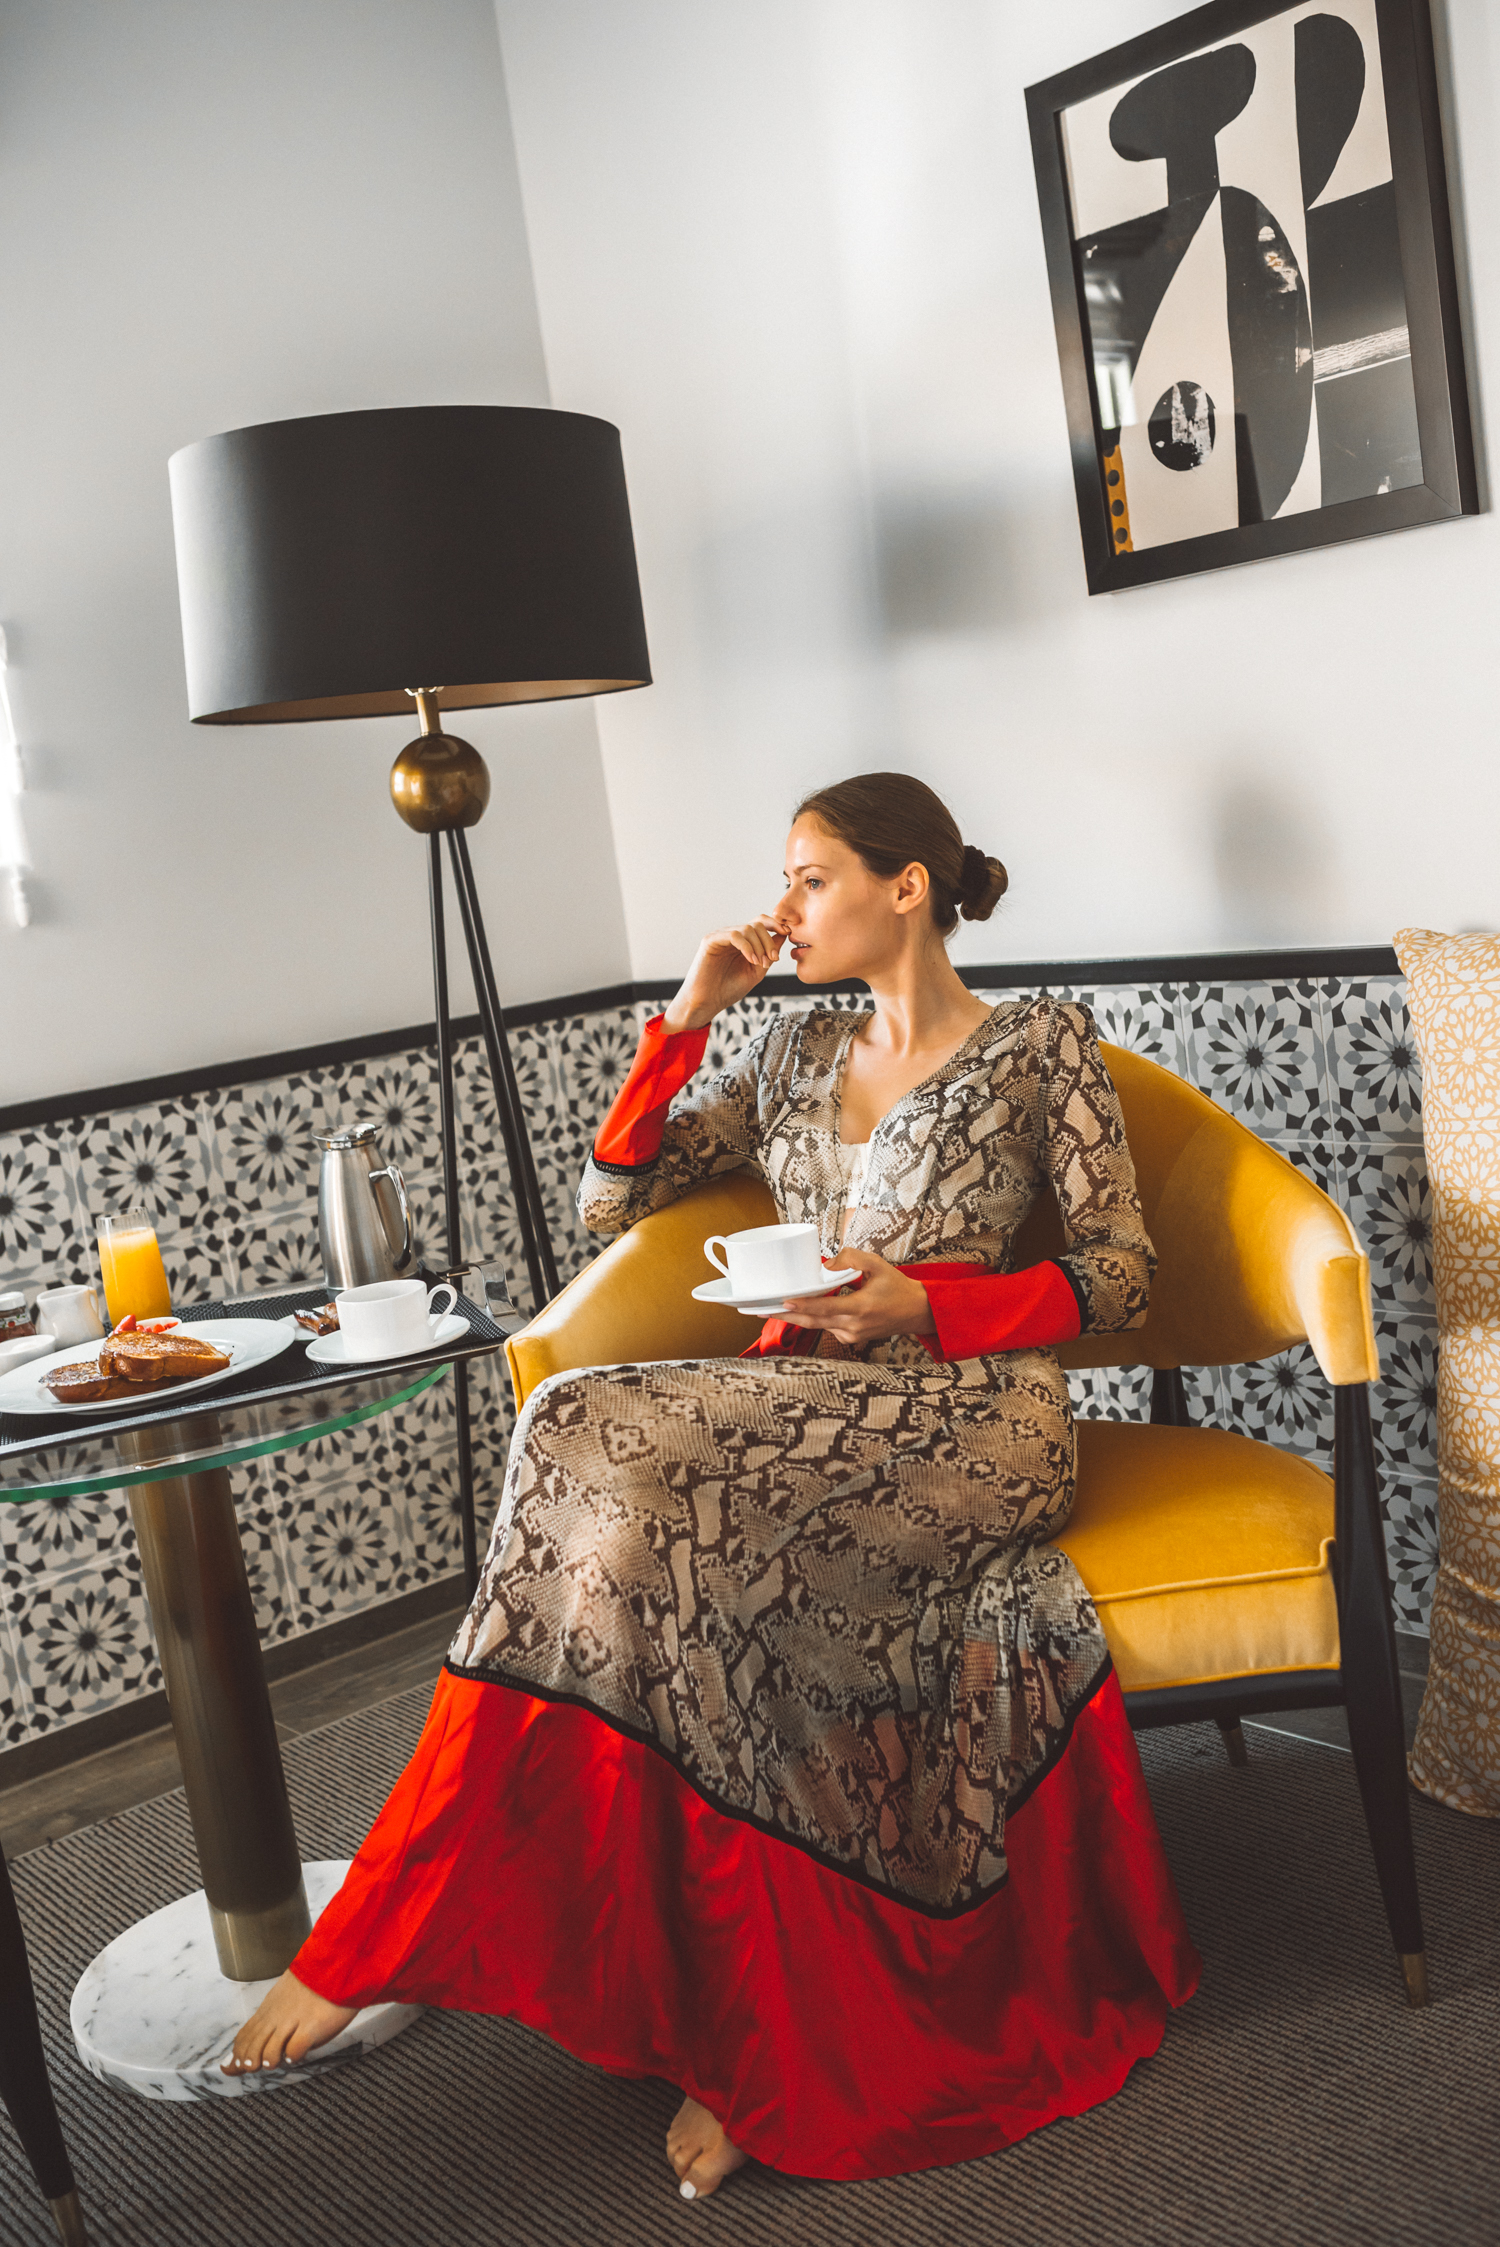 Alyssa Campanella of The A List blog visits Hotel Californian in Santa Barbara with Torrance Coombs wearing We Are Leone python robe for an anniversary trip.